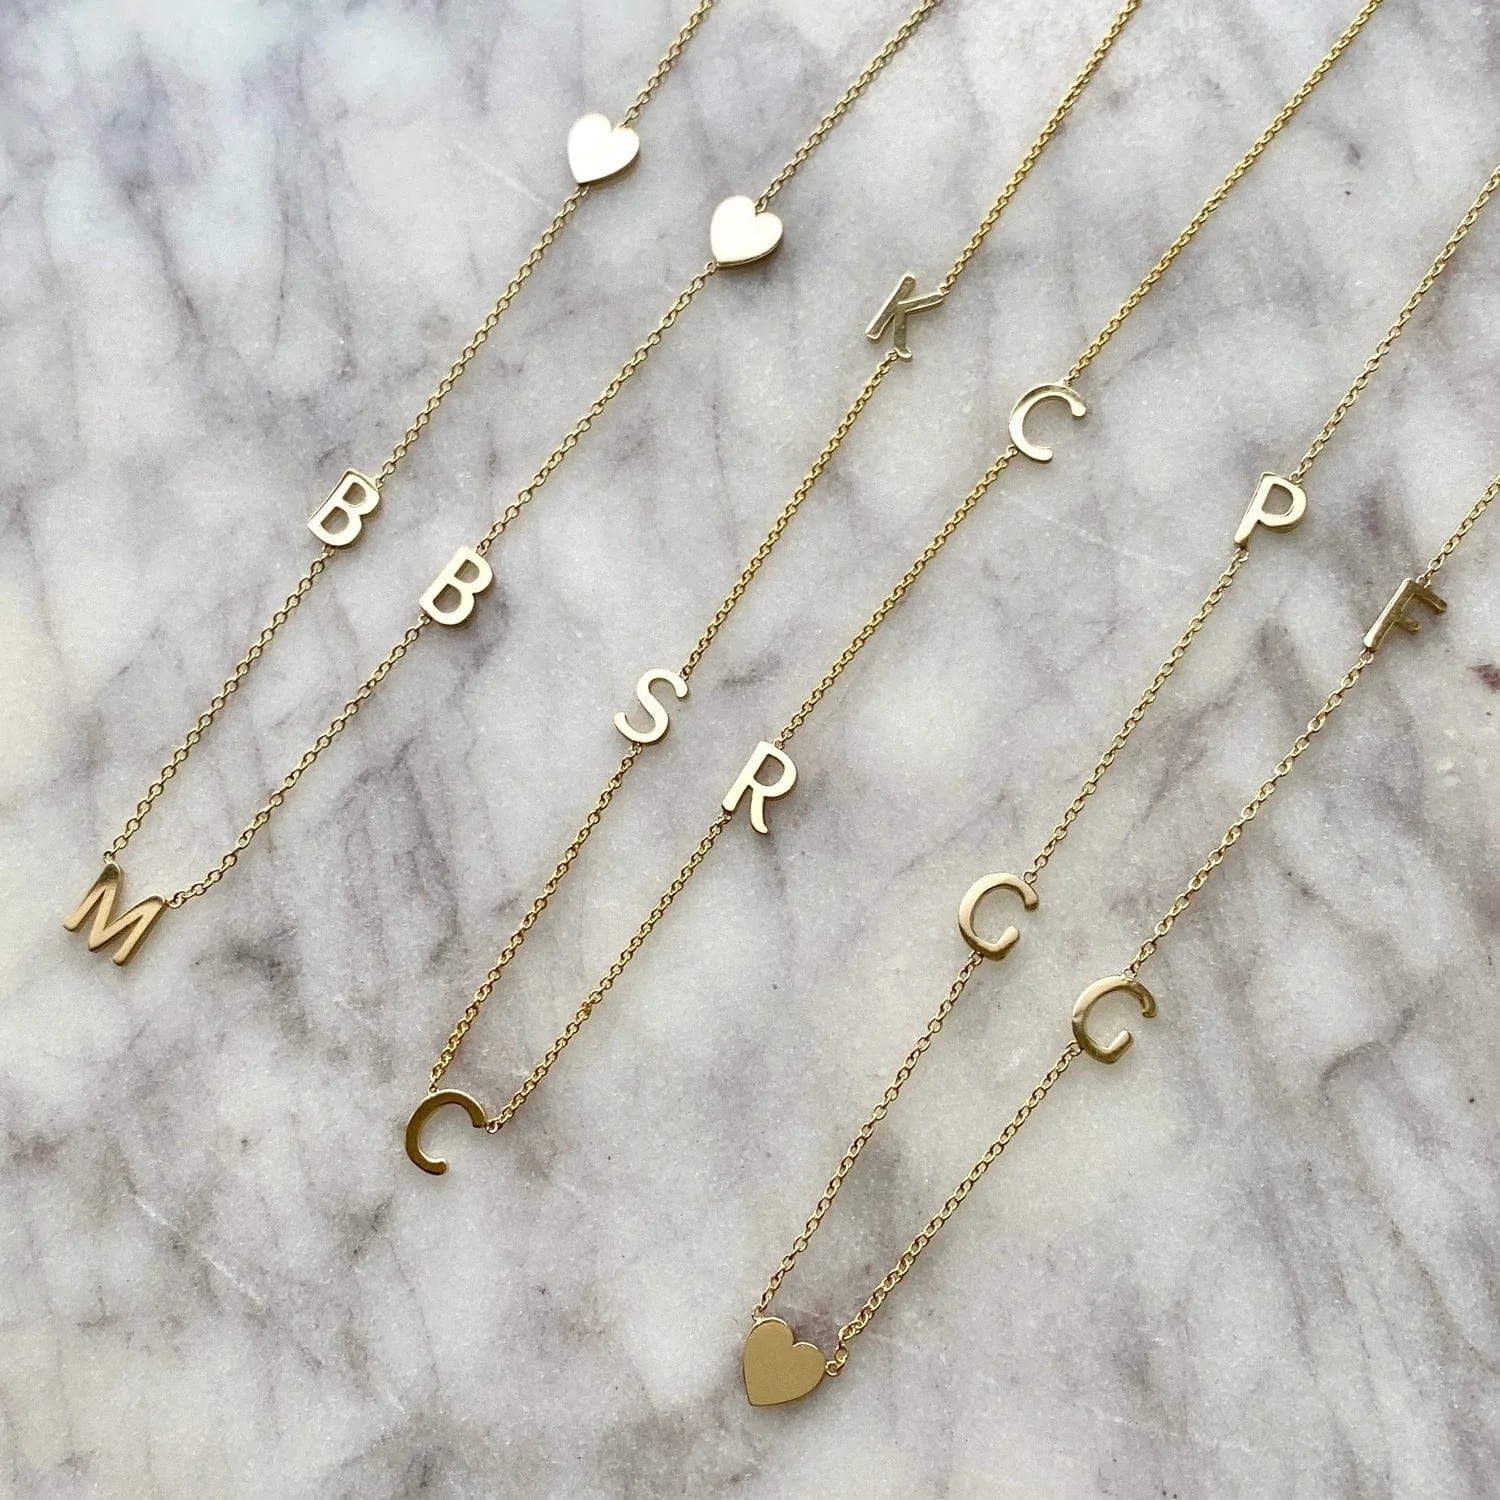 14K Gold Asymmetrical Multiple initials Necklace 18 + / 2